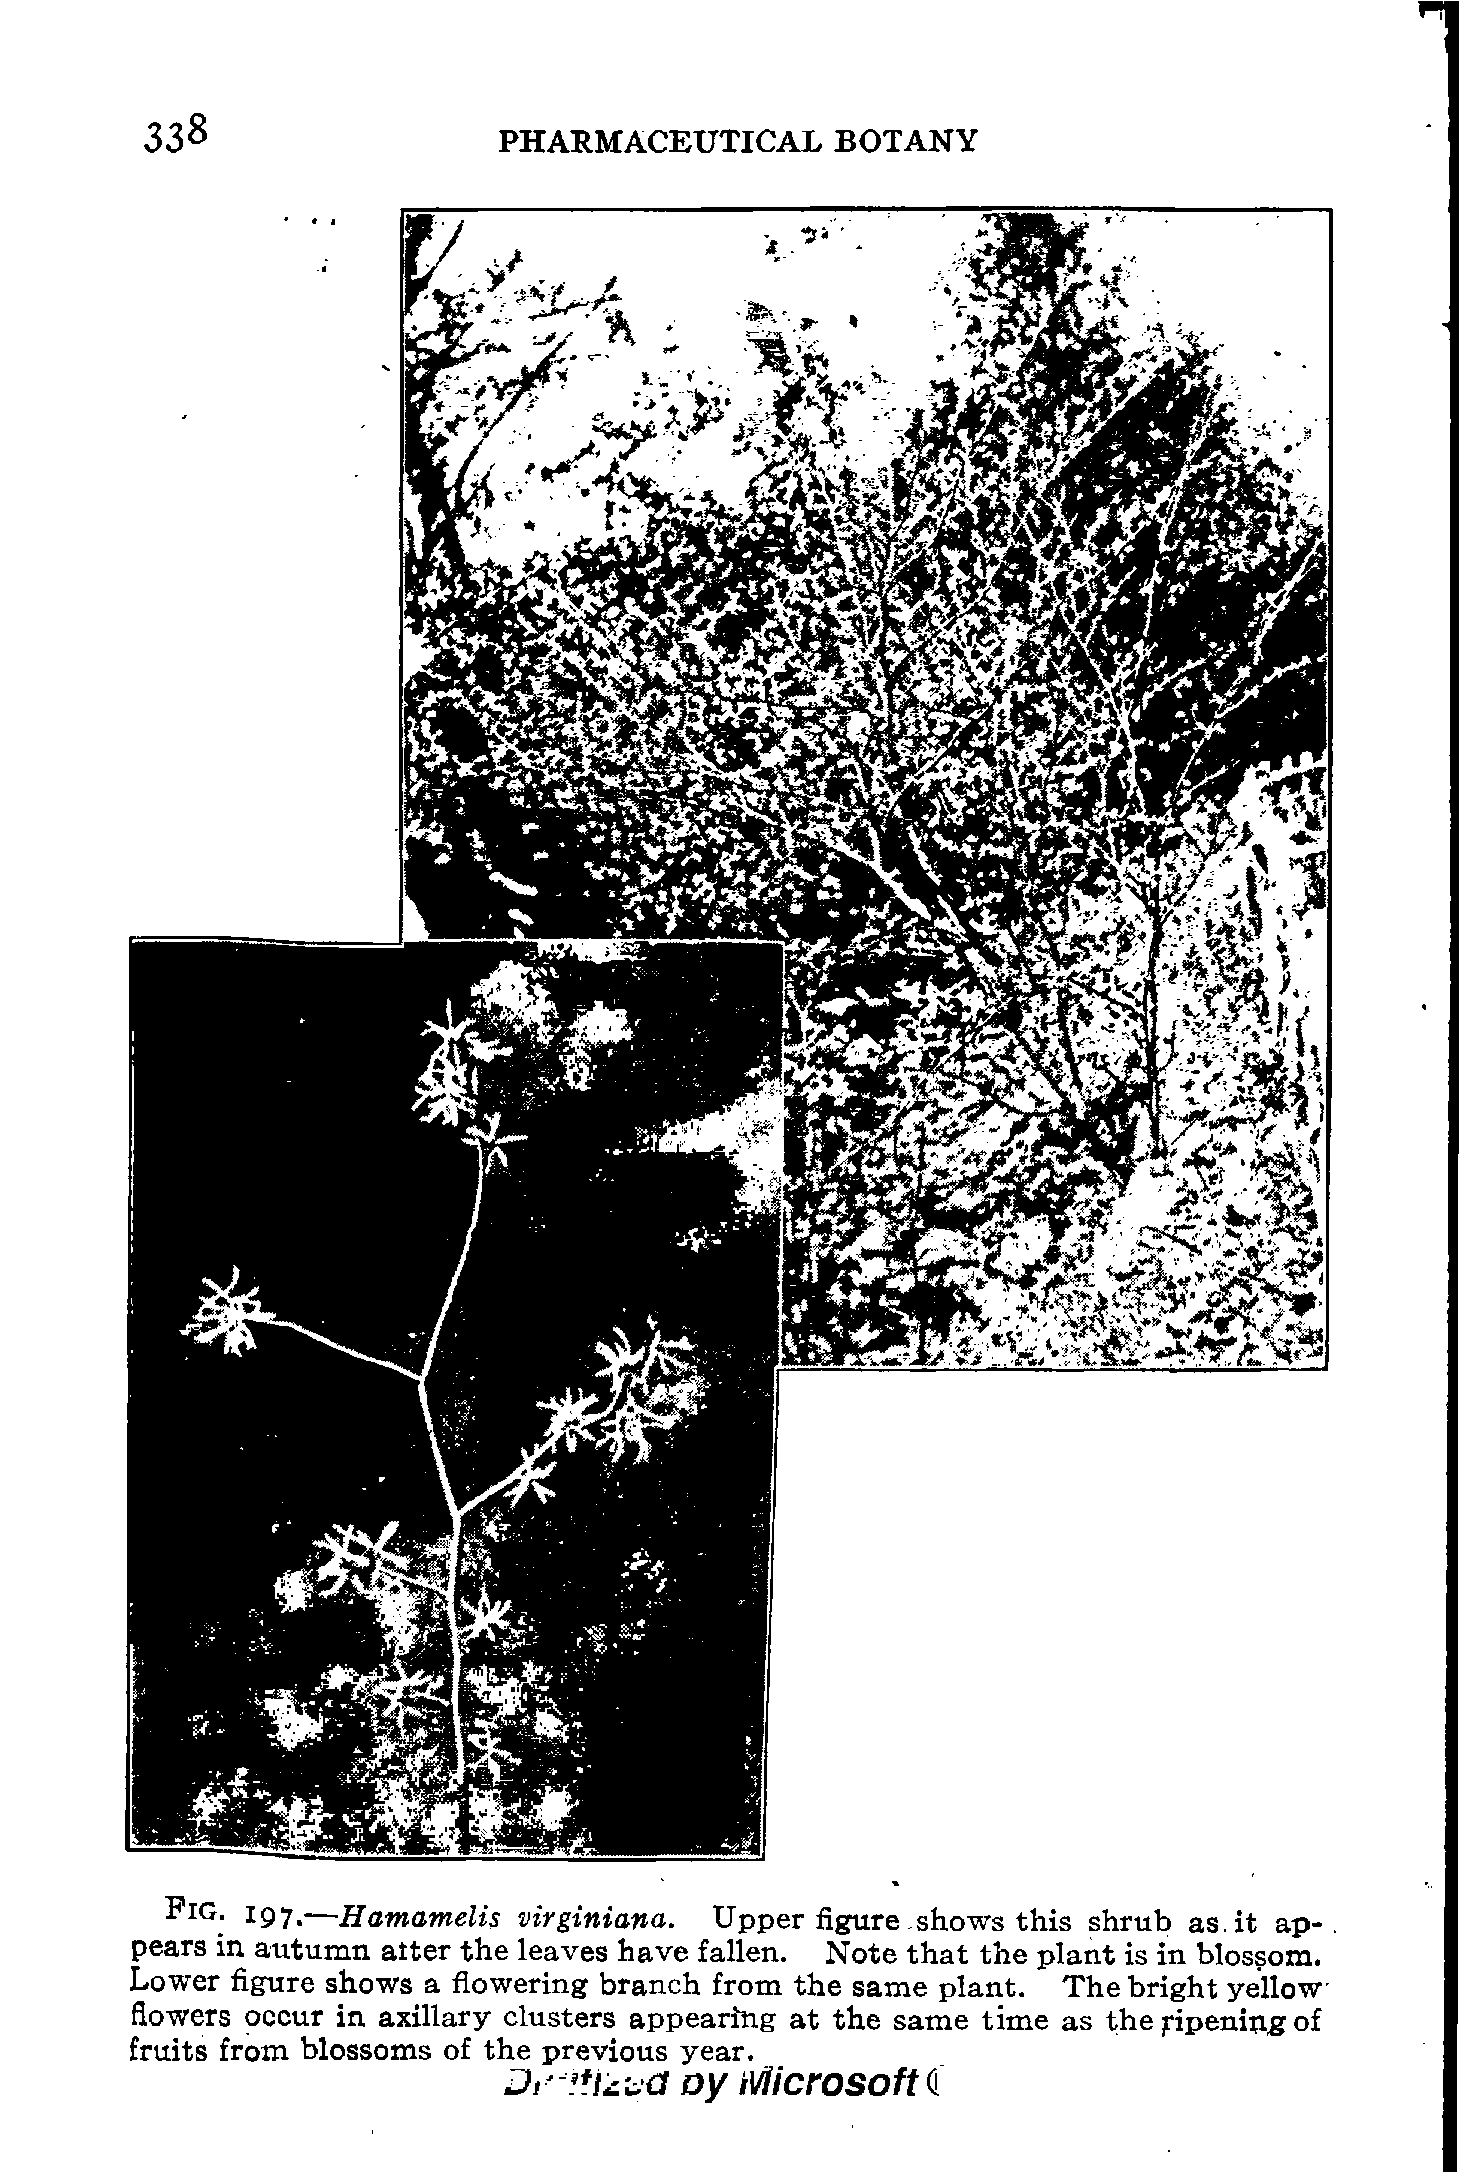 Fig. 197.—Hamamelis virginiana. Upper figure shows this shrub as.it ap-. pears in autumn alter the leaves have fallen. Note that the plant is in blossom. Lower figure shows a flowering branch from the same plant. The bright yellow flowers occur in axillary clusters appearing at the same time as the fipening of fruits from blossoms of the previous year.